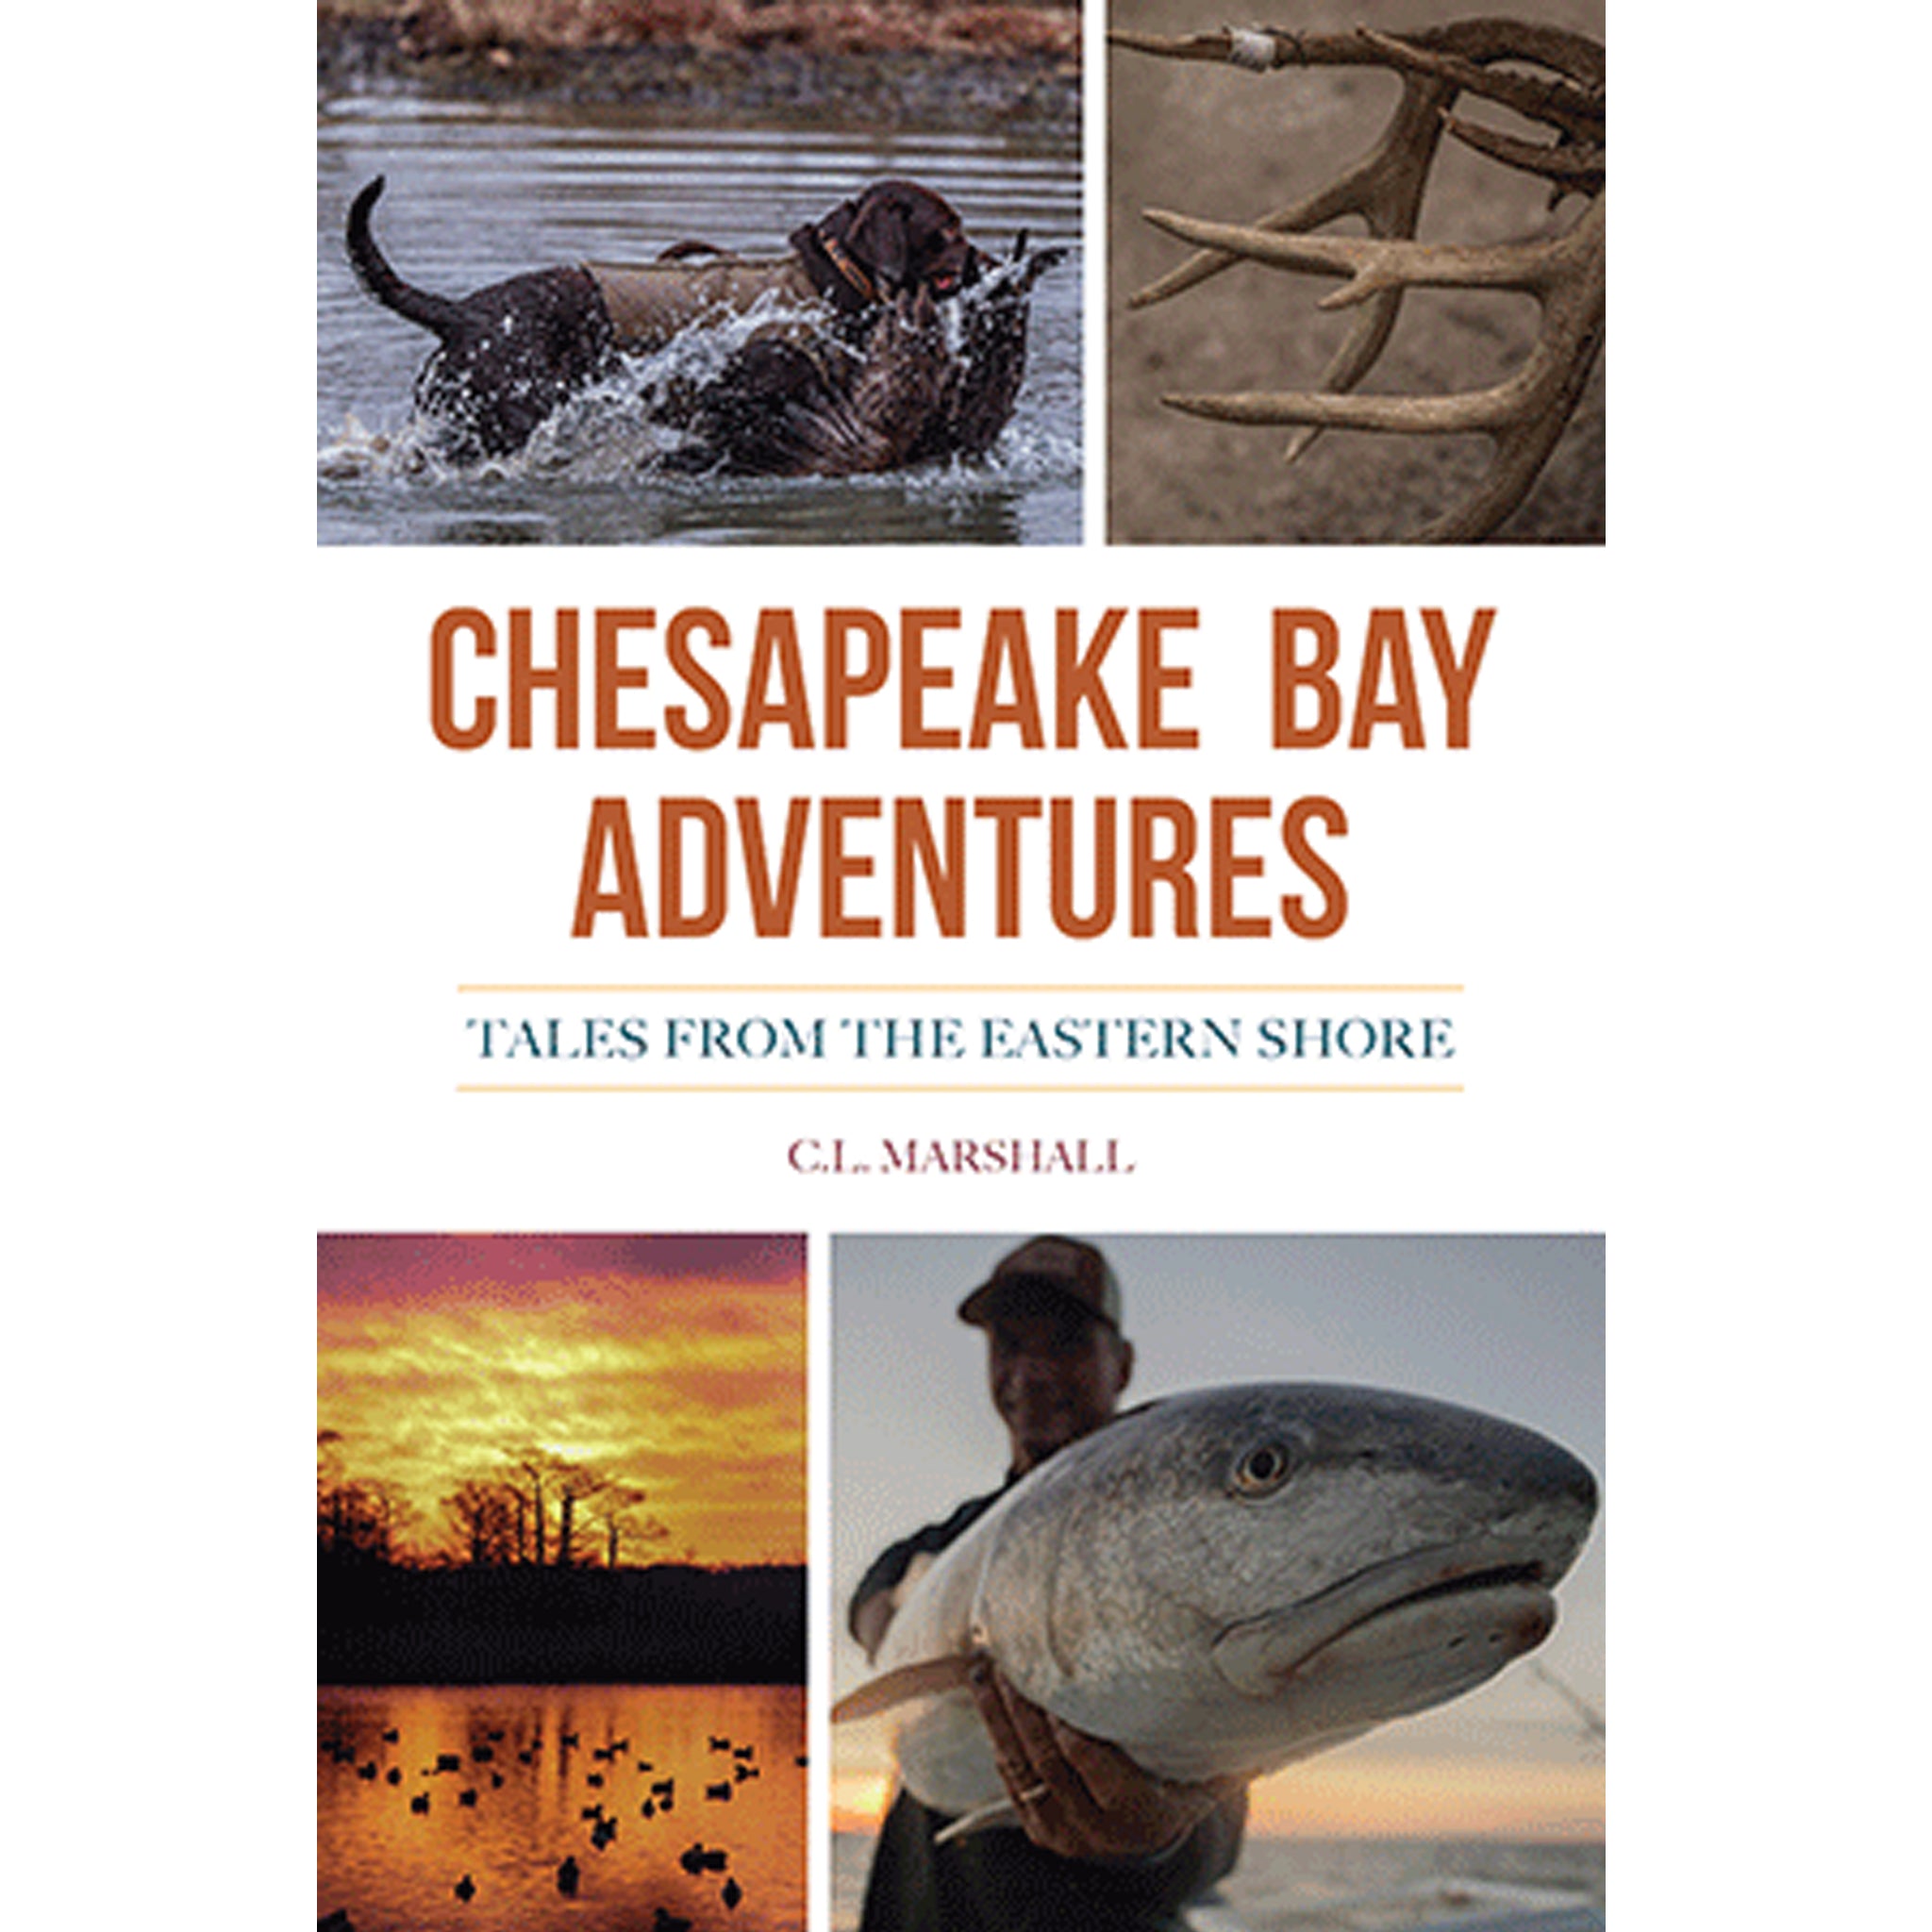 Derelict fishing gear makes the Chesapeake crabby, and not in a